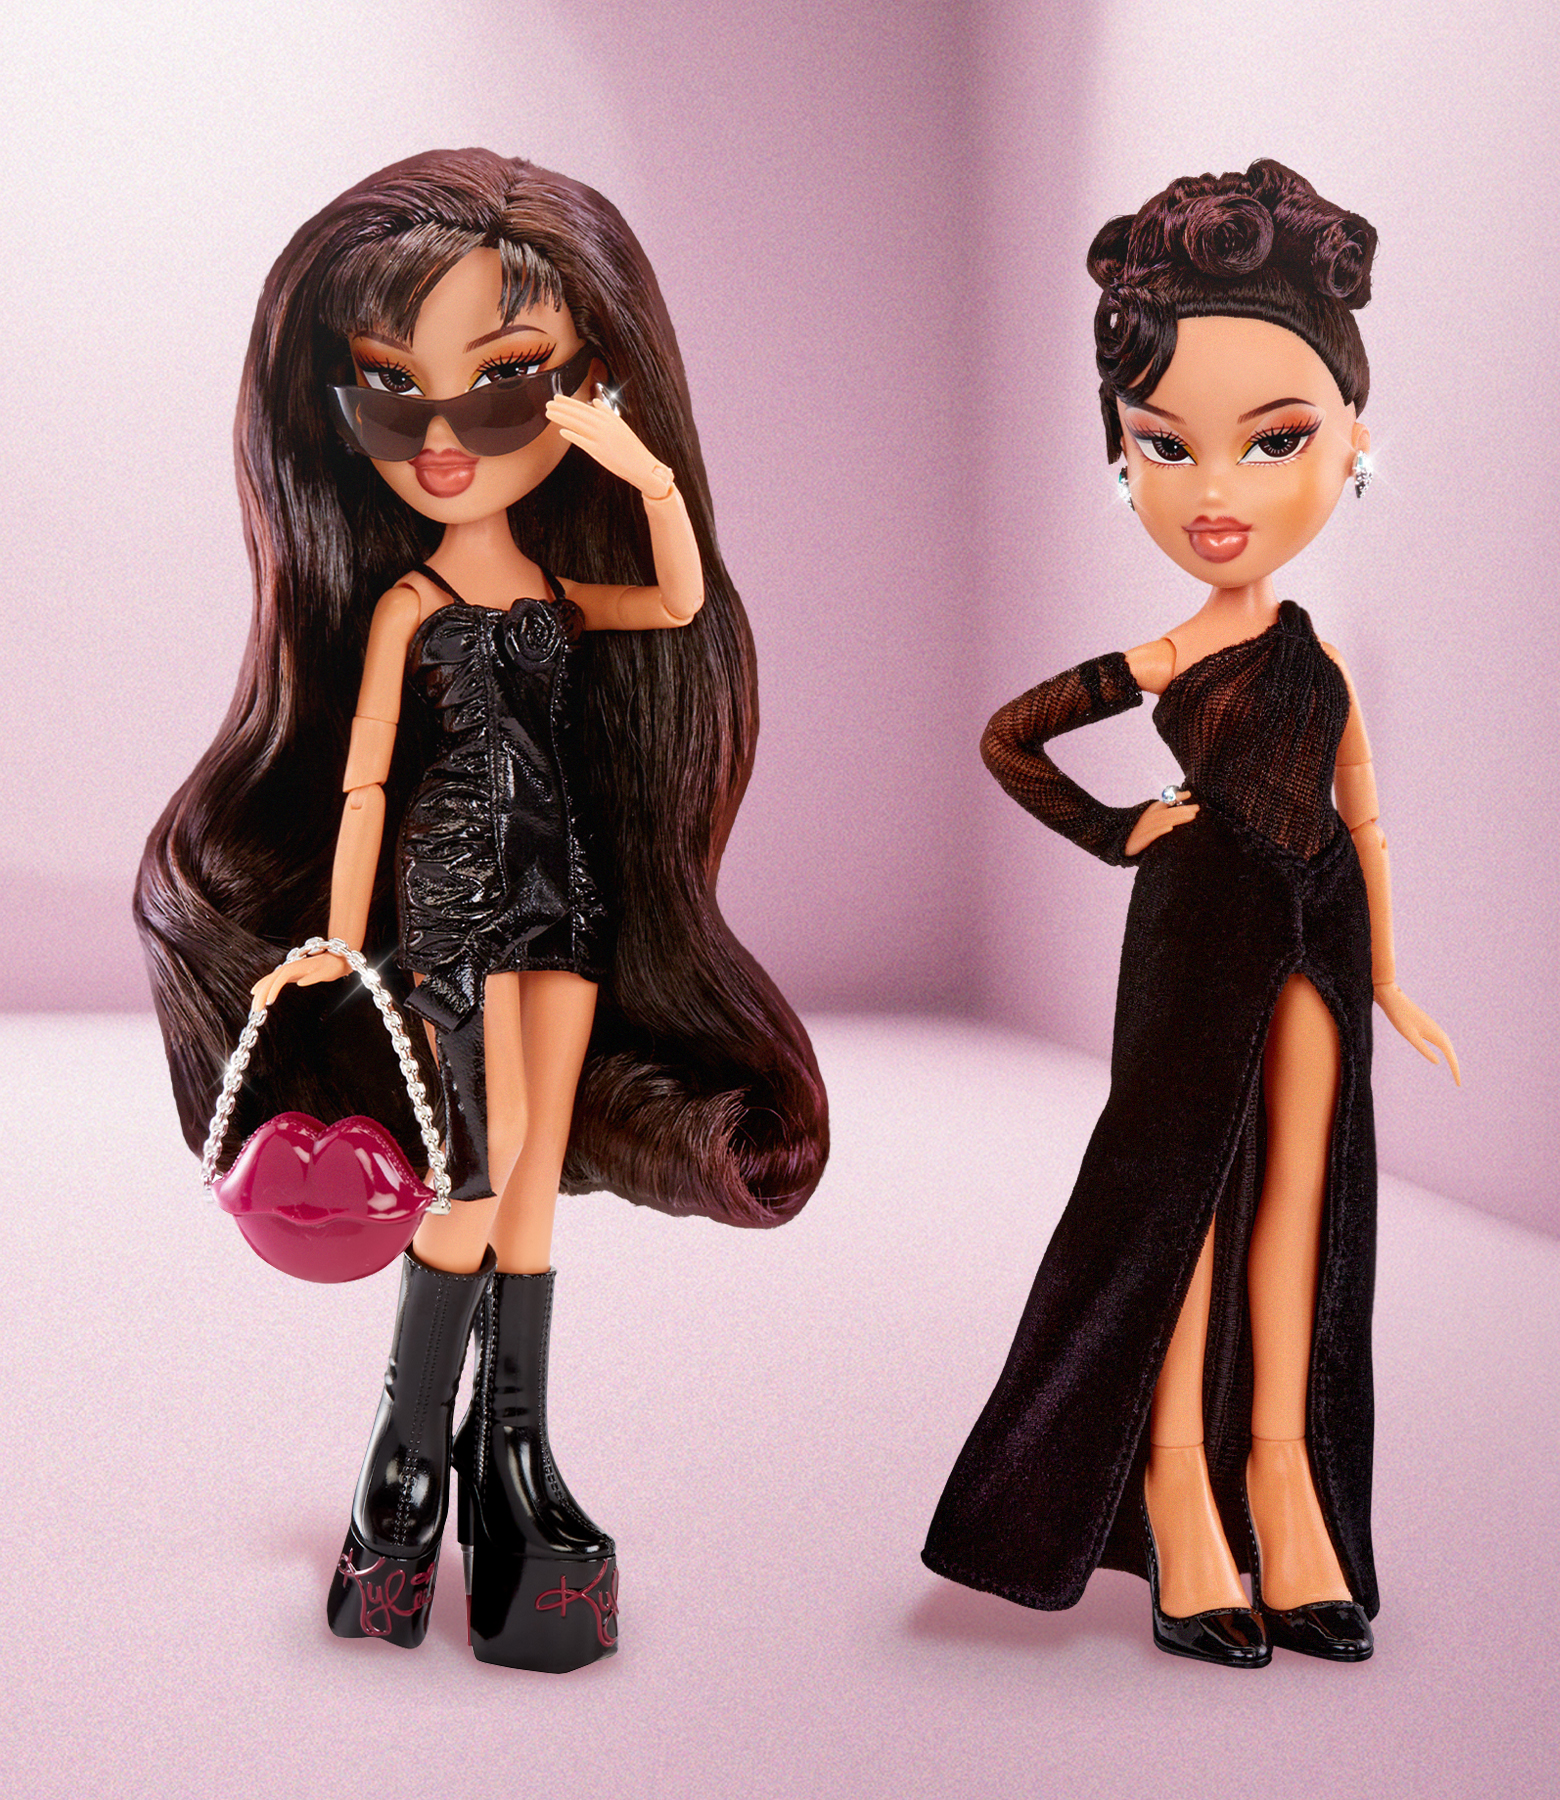 Bratz Expands Partnership with Kylie Jenner to Release